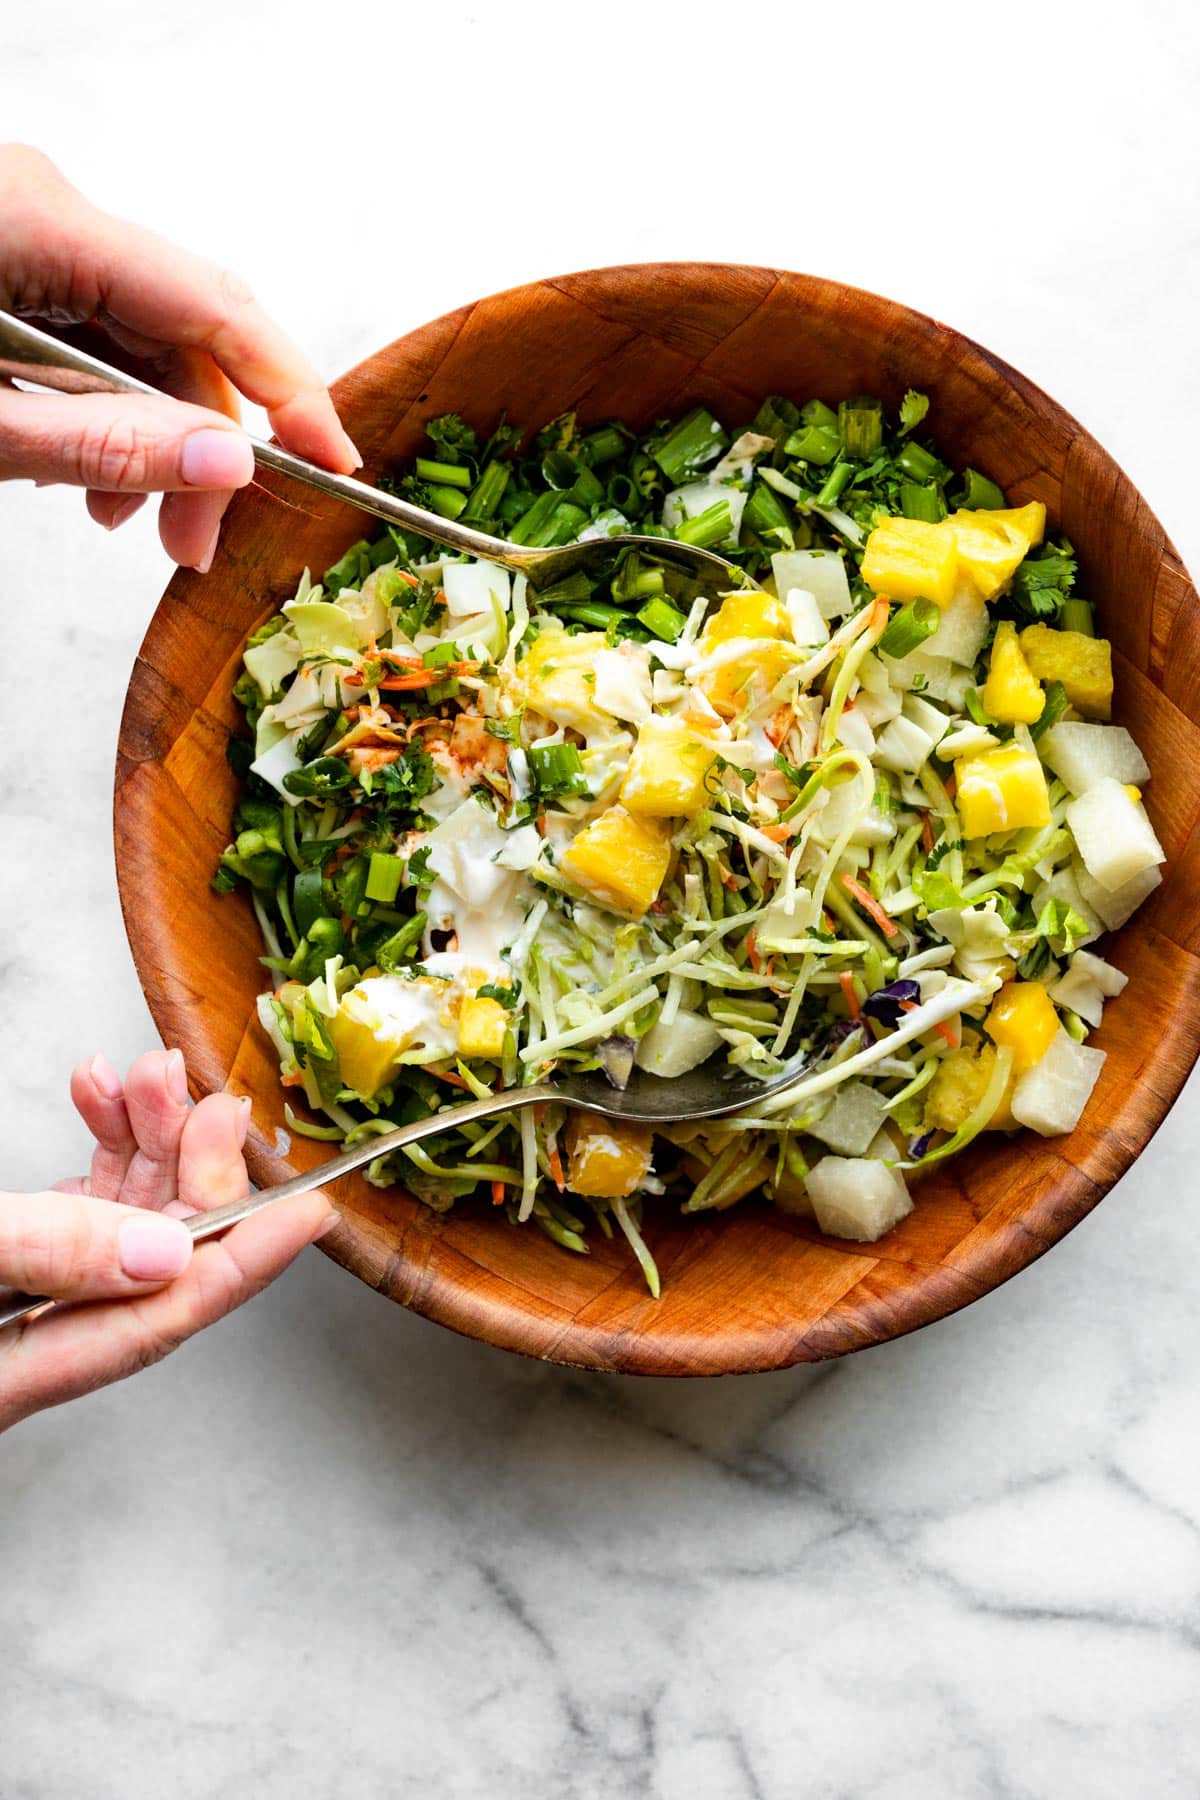 Two hands tossing pineapple coleslaw together in a wooden bowl.